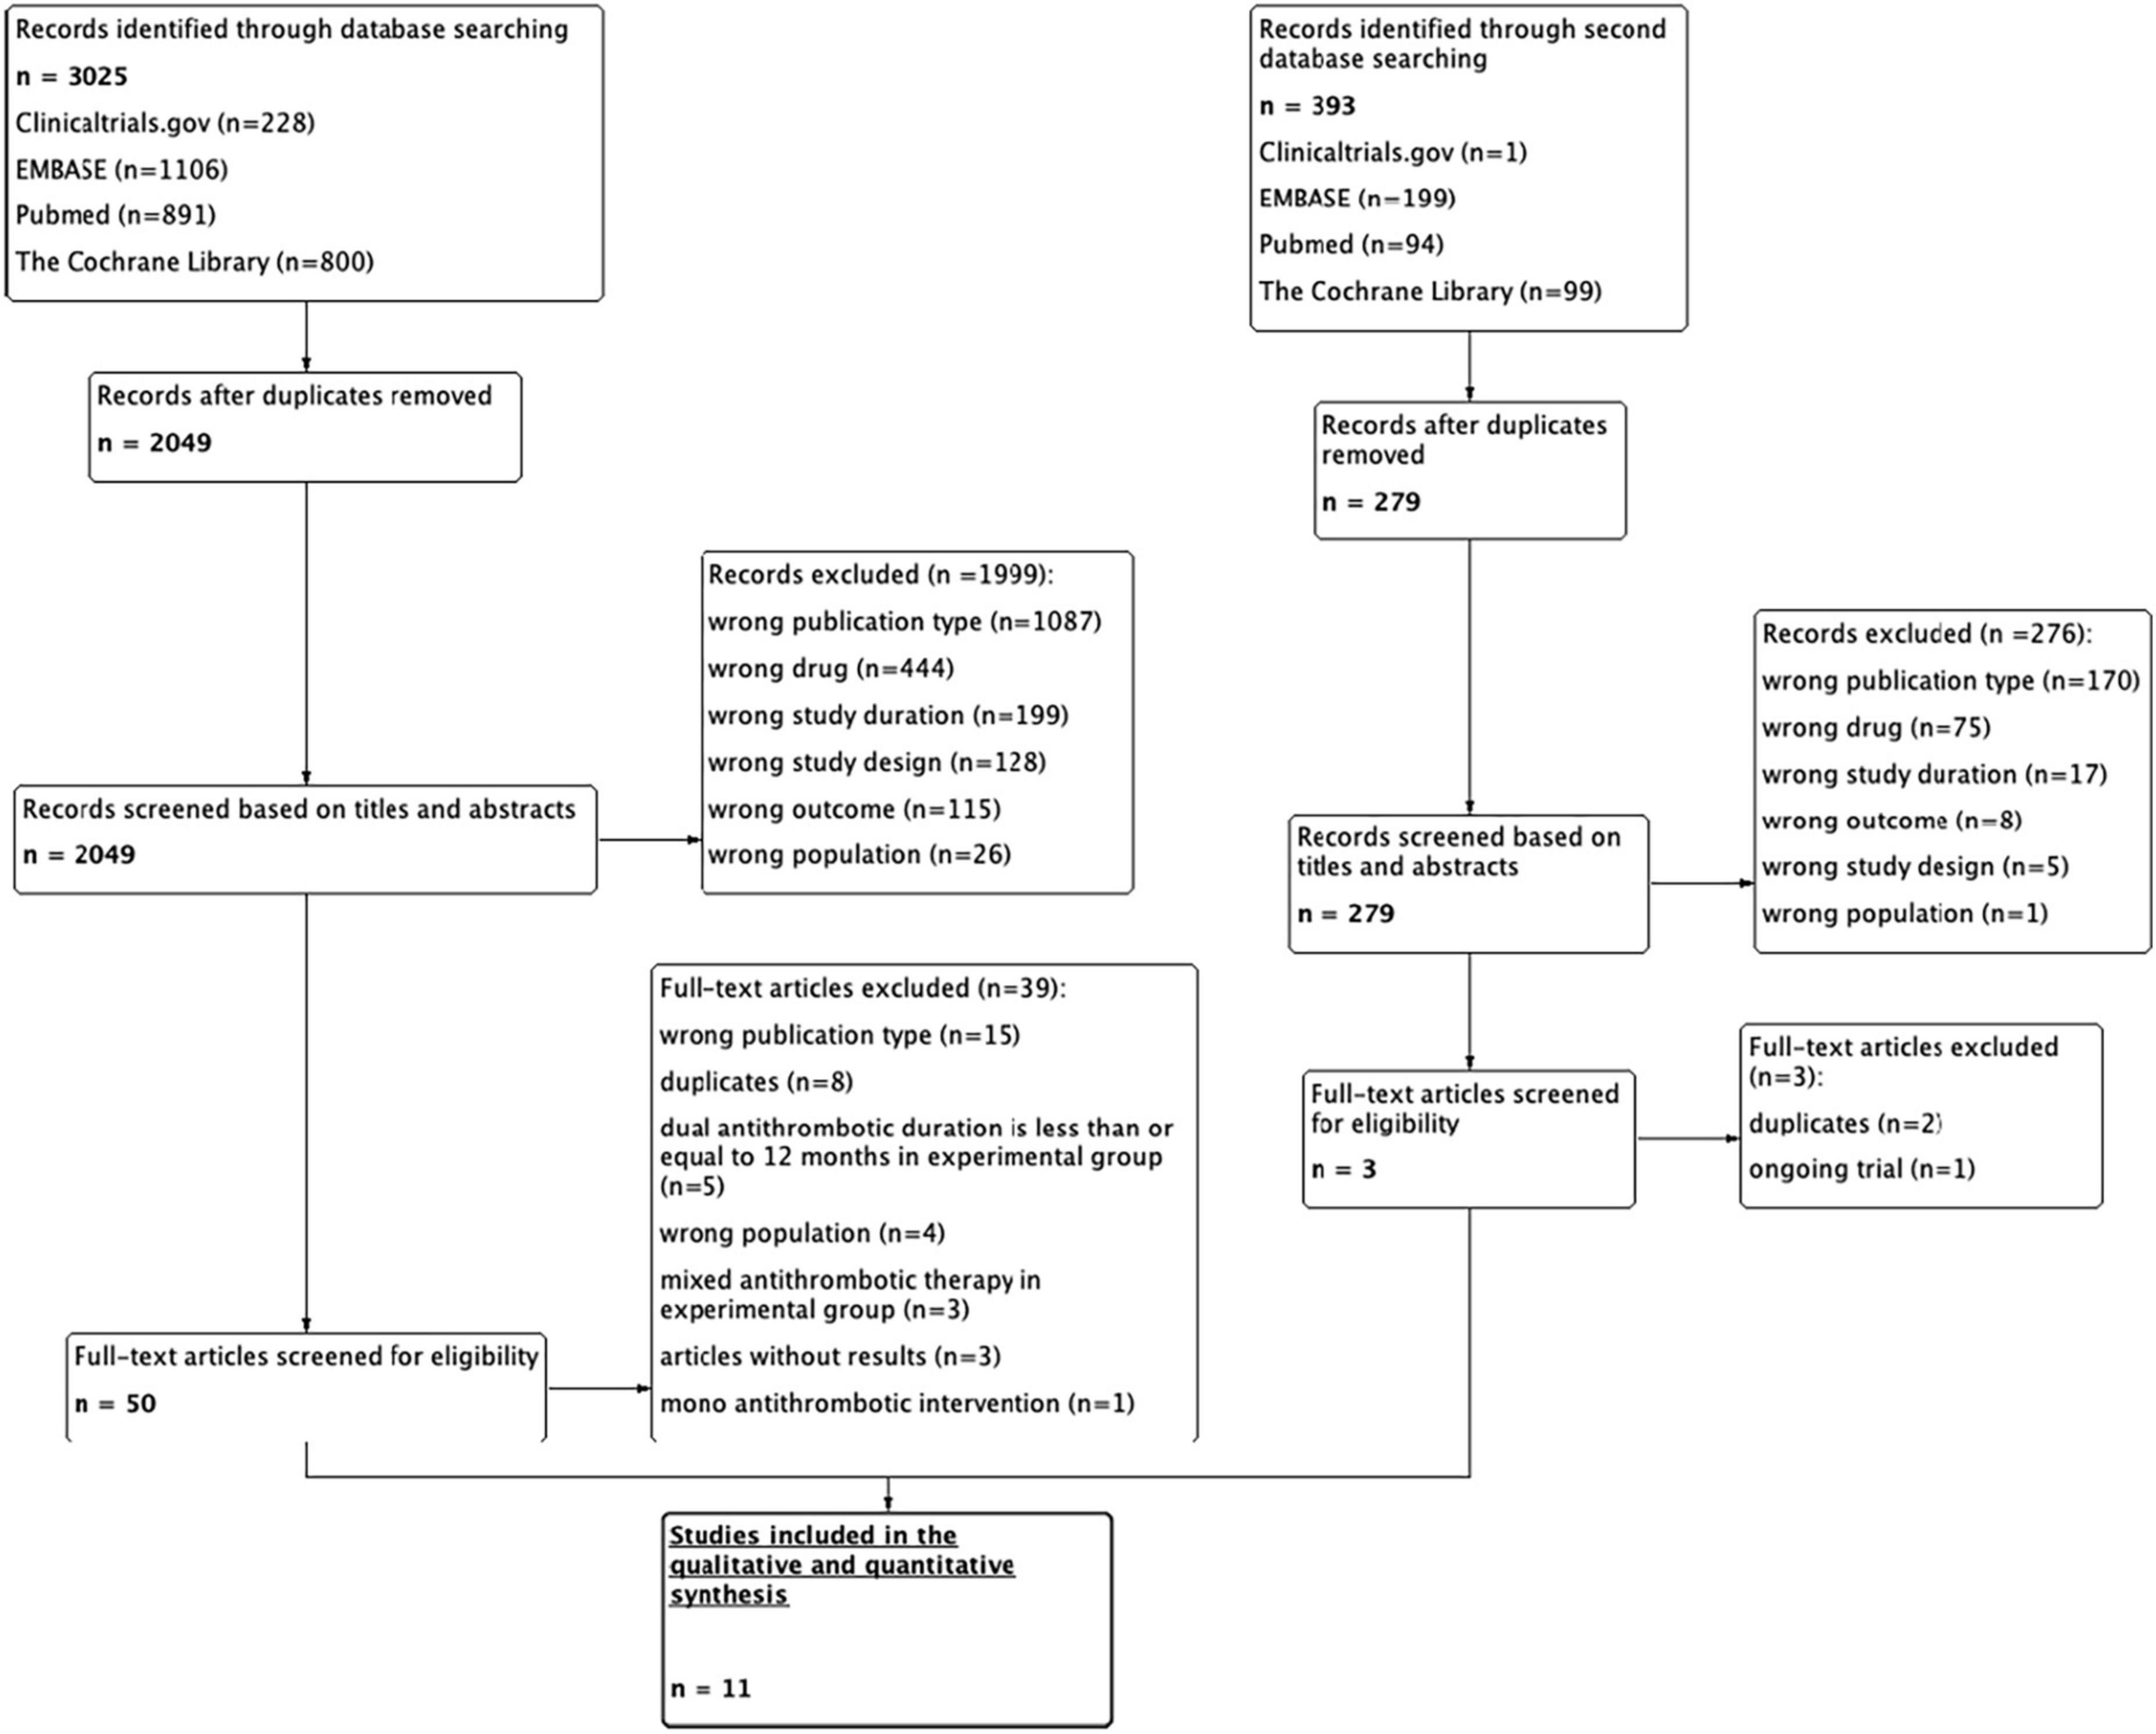 Efficacy and safety outcomes of long-term anti-thrombotic treatment of chronic coronary artery disease: A systematic review and network meta-analysis